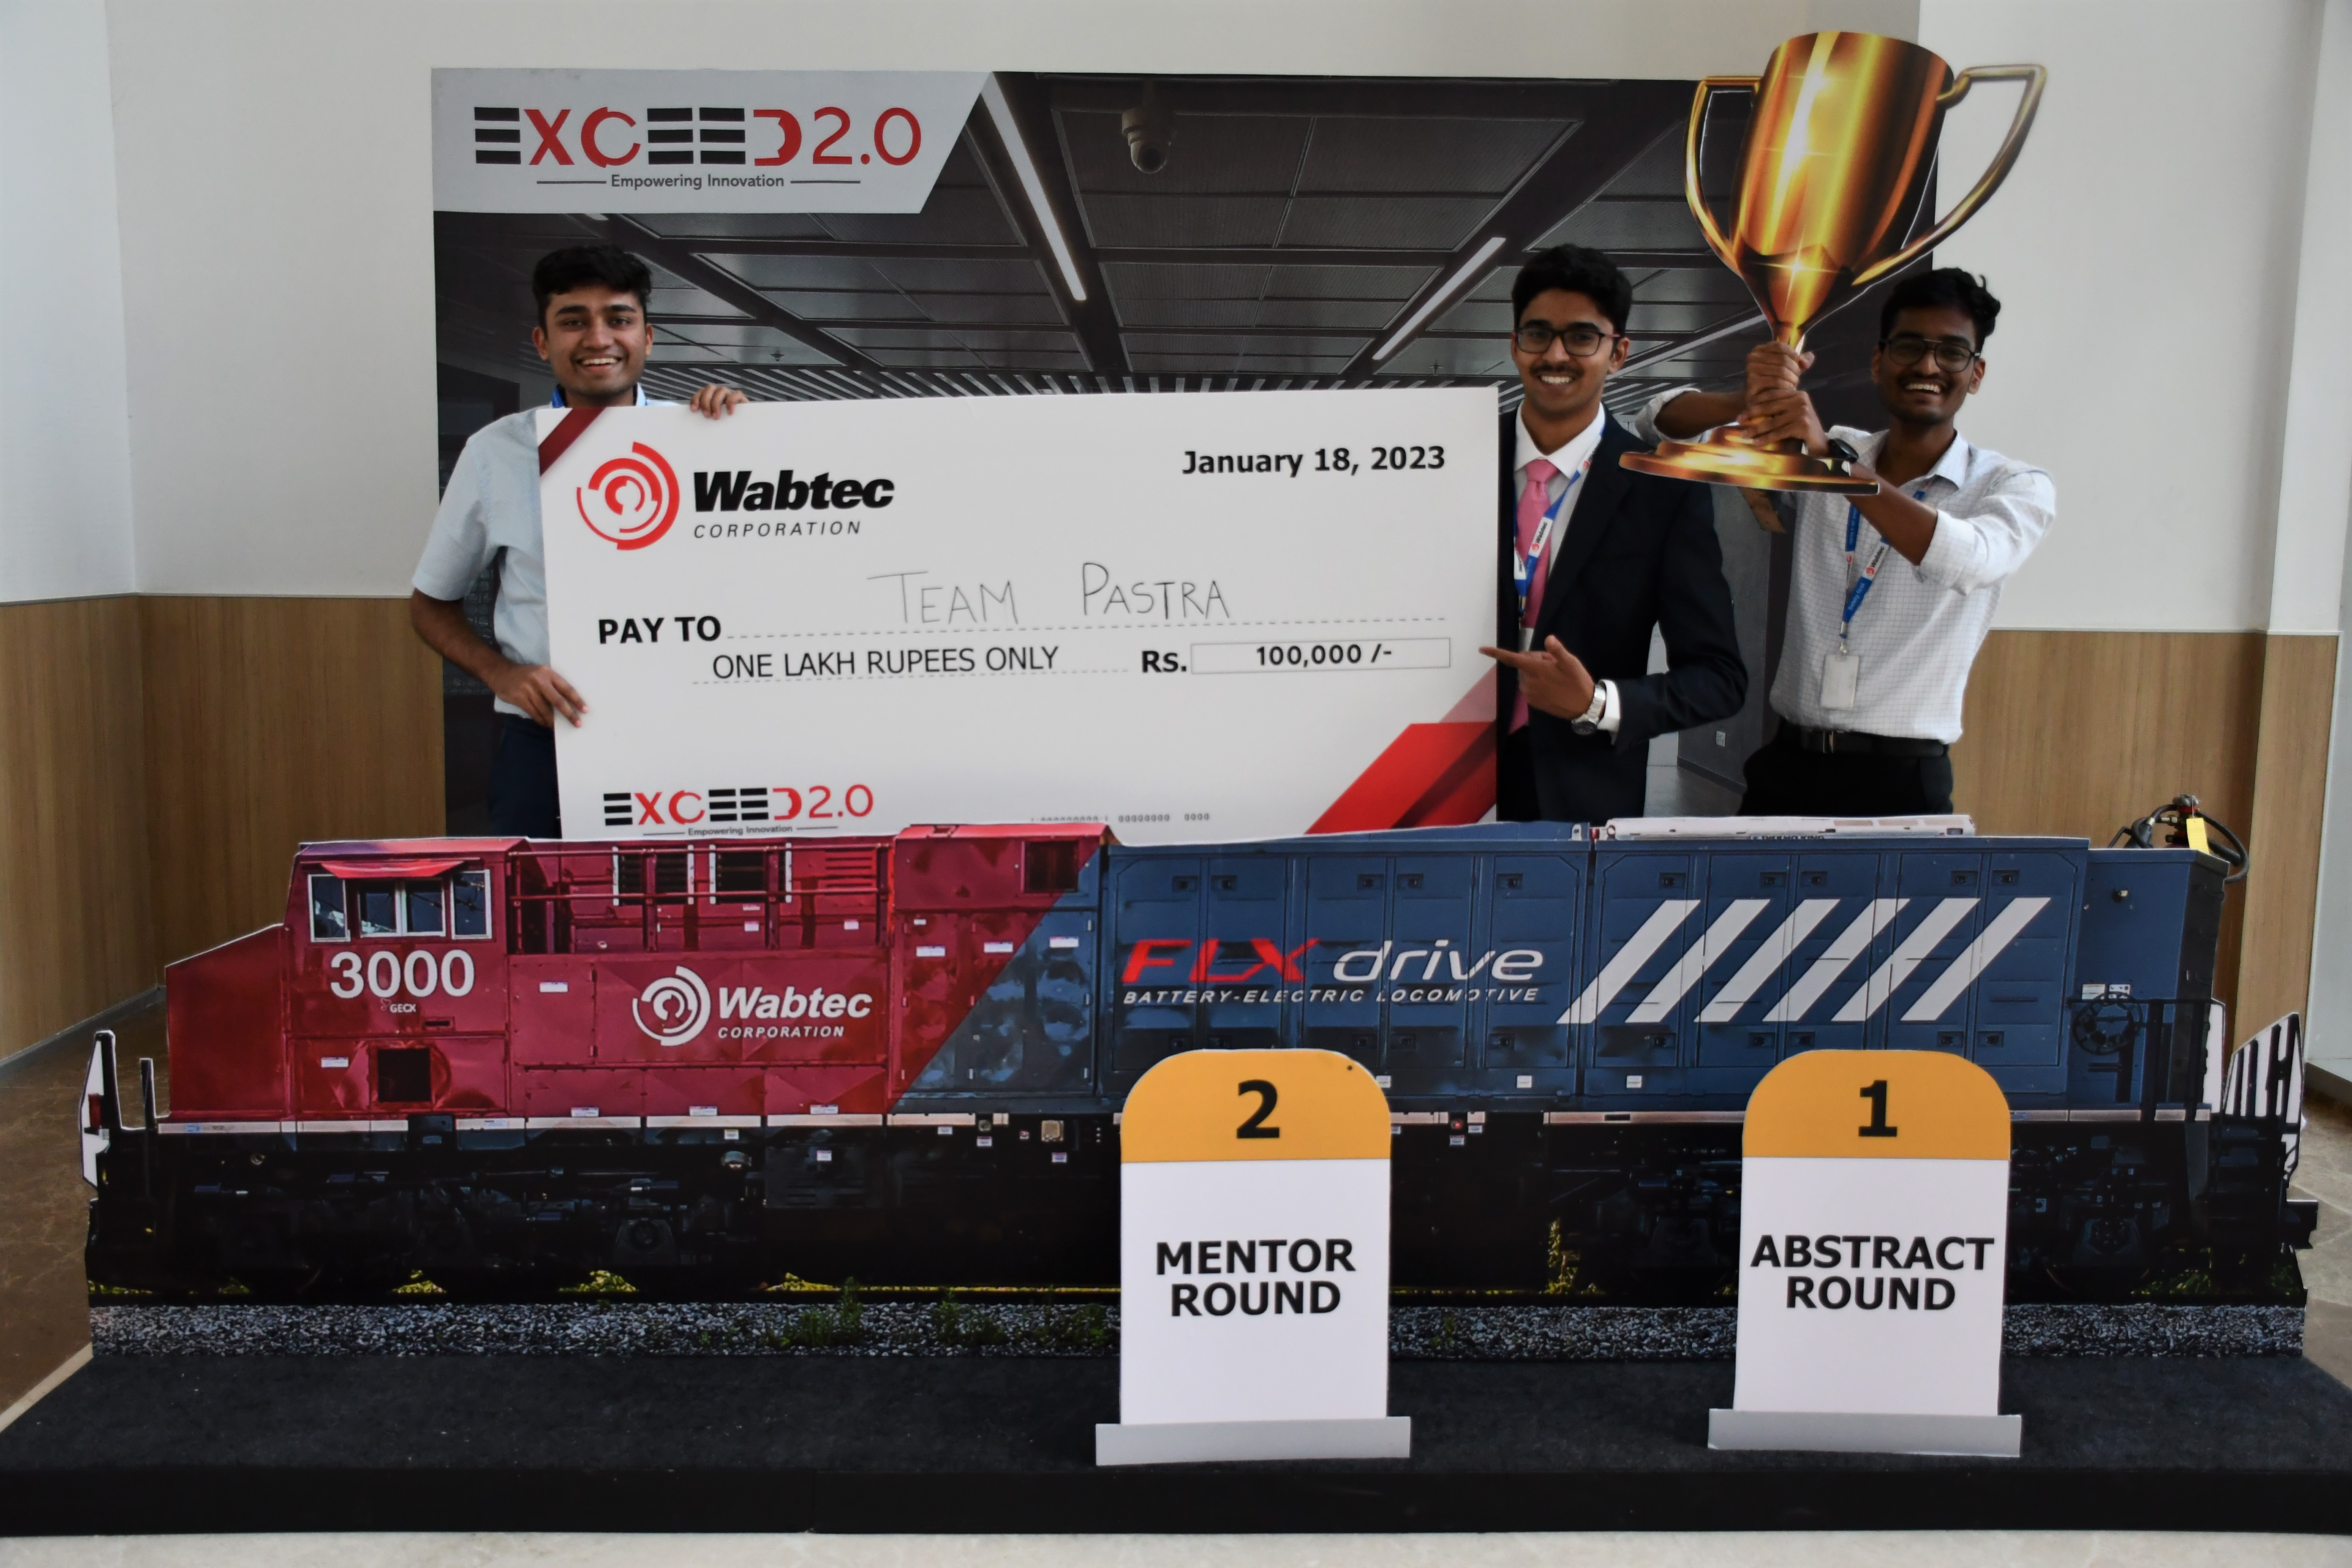 Wabtec Announce Winners of ‘Exceed’ College Campus Challenge